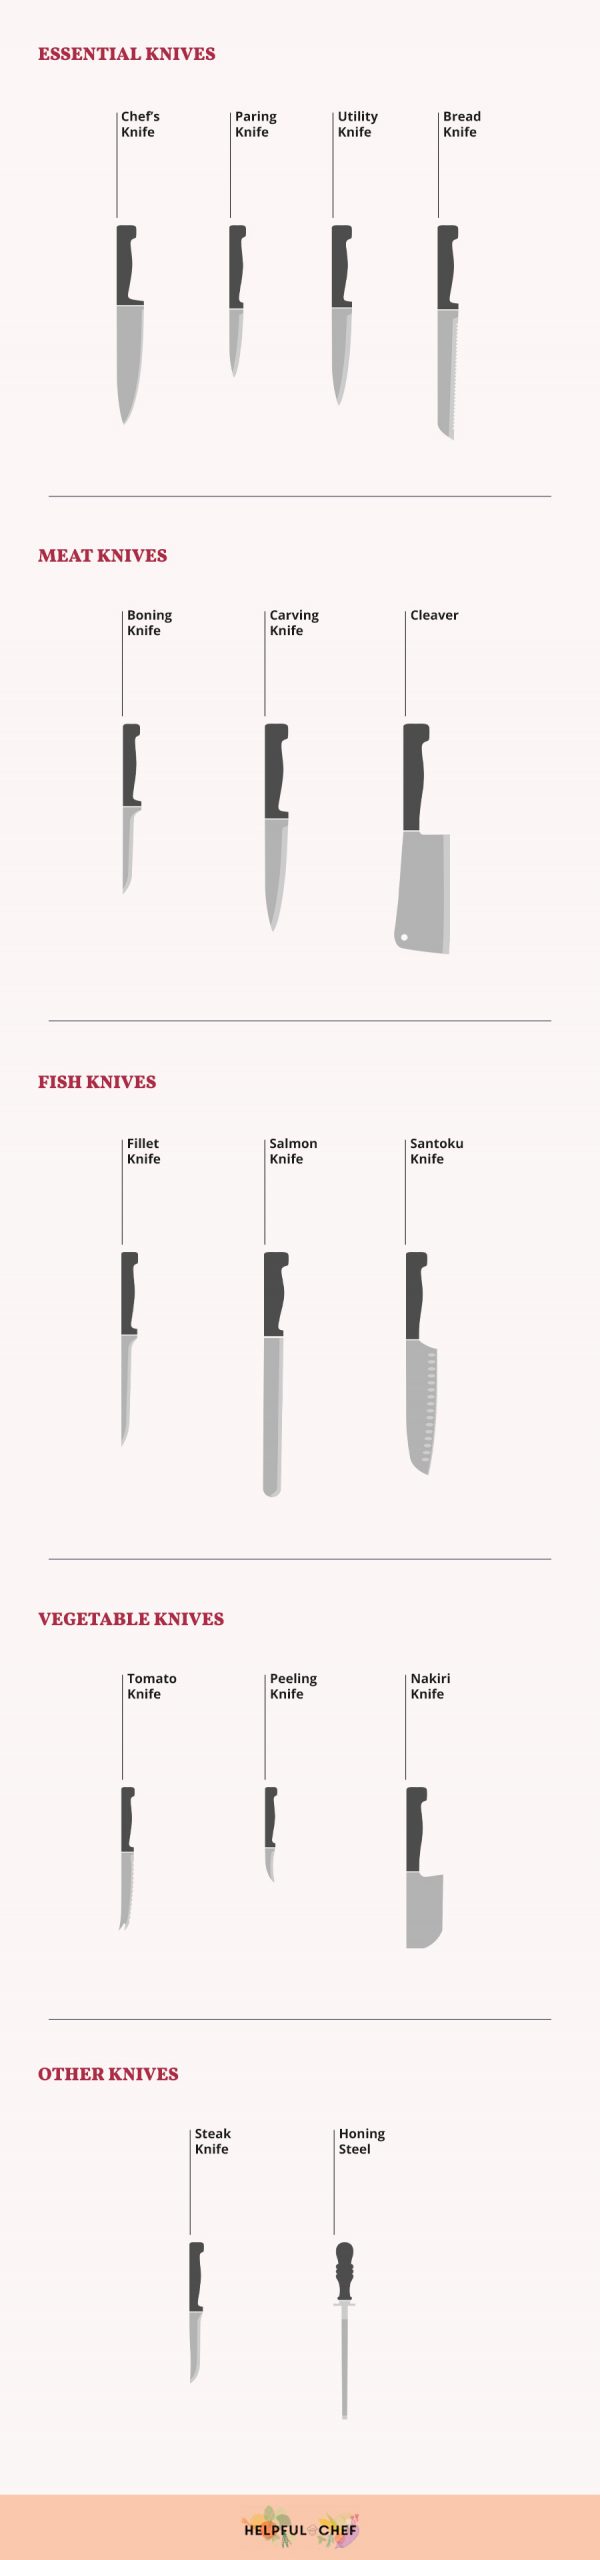 Different knives have different jobs